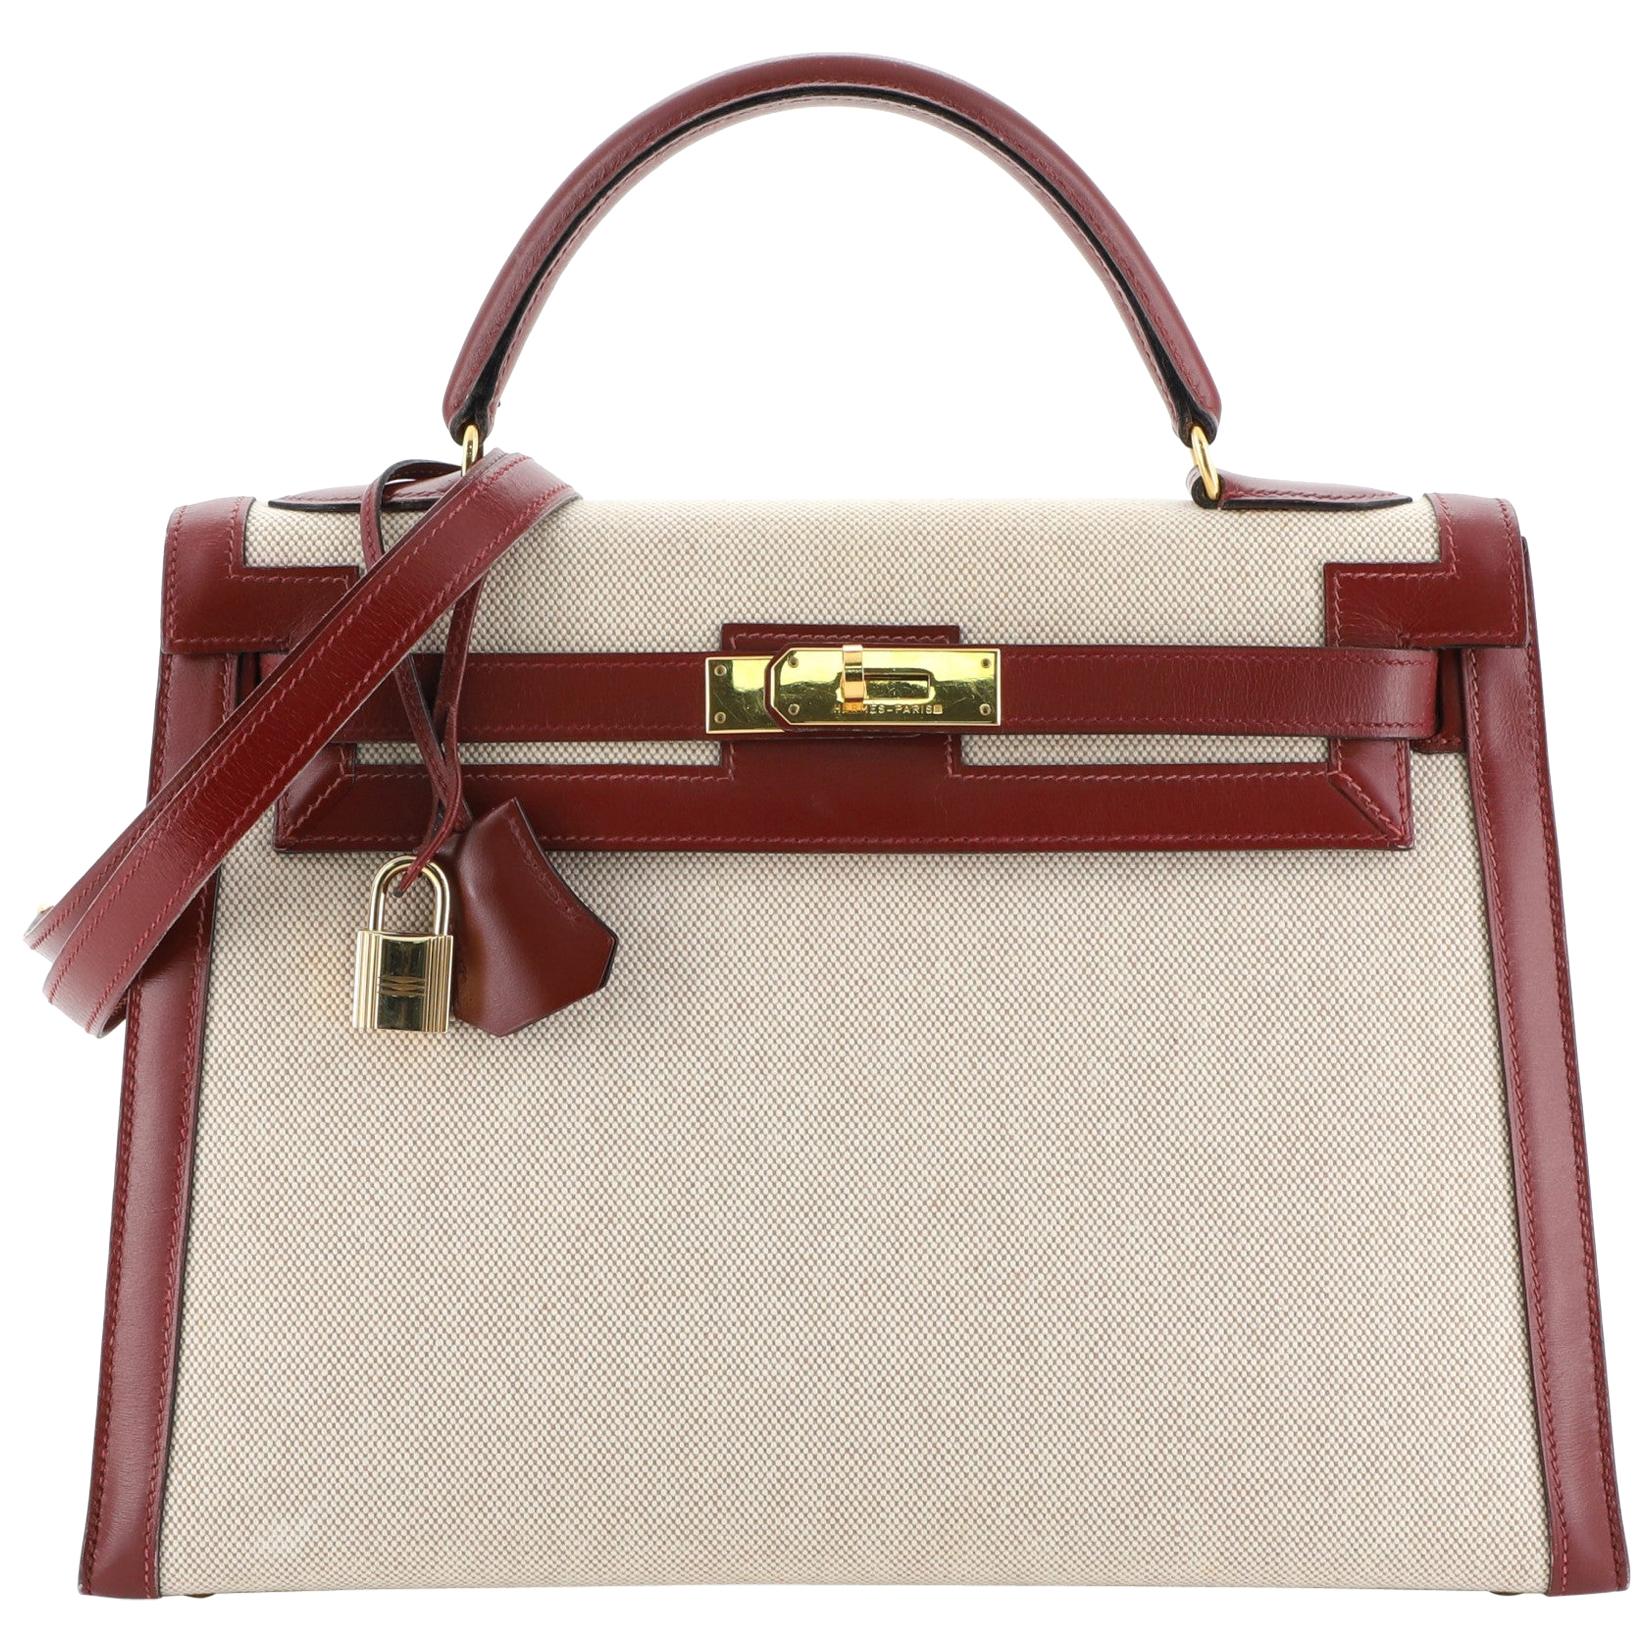 Hermes Kelly Handbag Toile And Rouge H Box Calf With Gold Hardware 32 